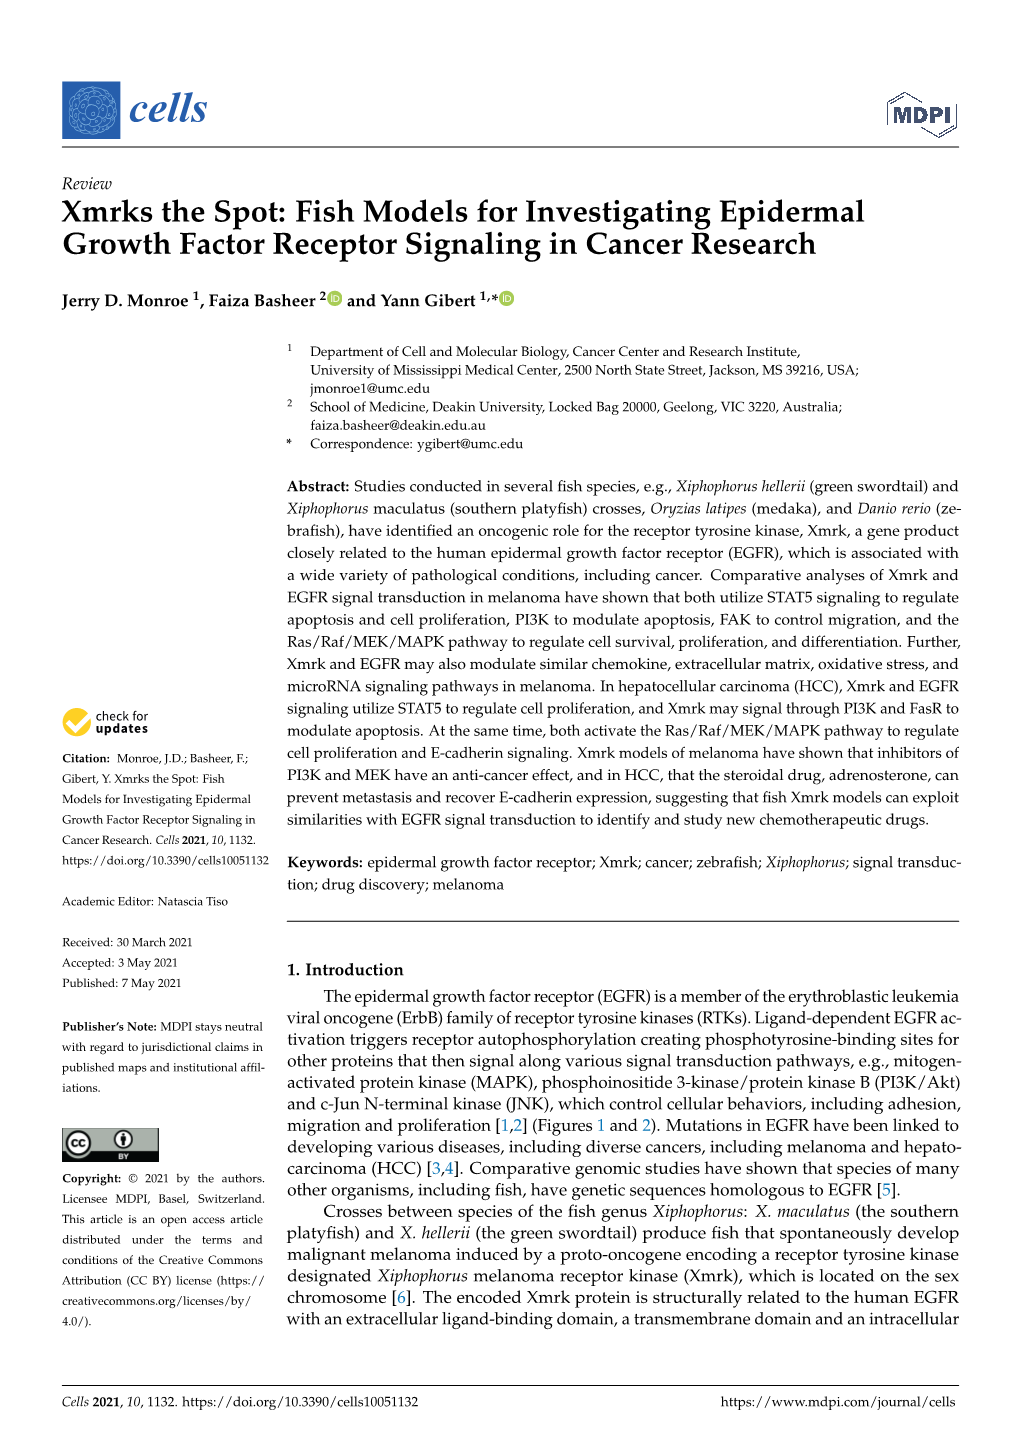 Xmrks the Spot: Fish Models for Investigating Epidermal Growth Factor Receptor Signaling in Cancer Research